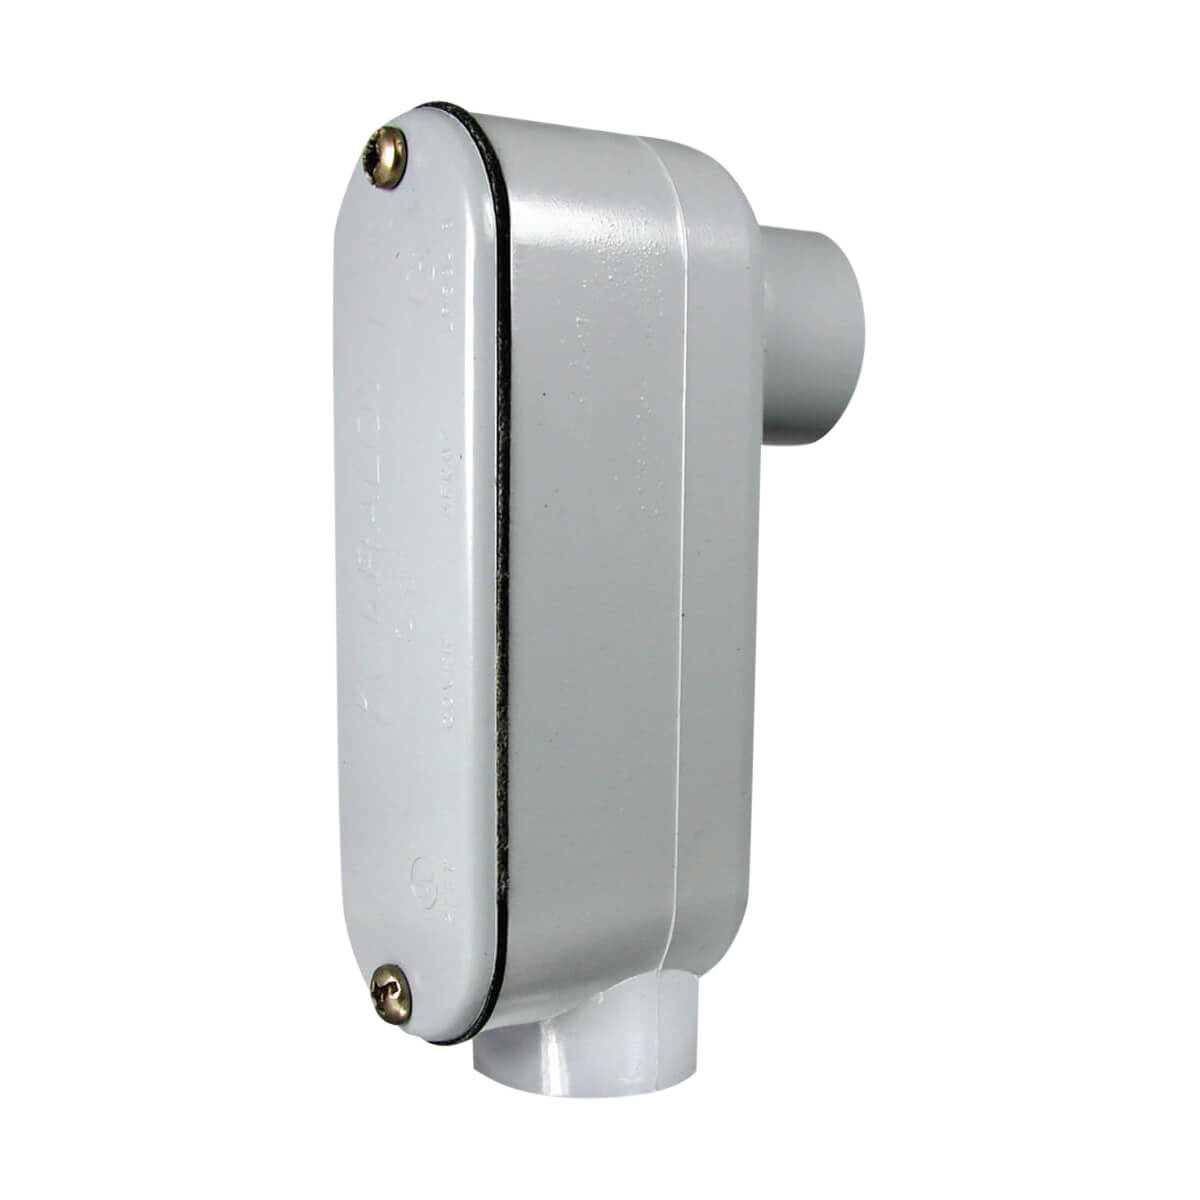 PVC Counduit Type LB Access Fitting - Hub - 2-in